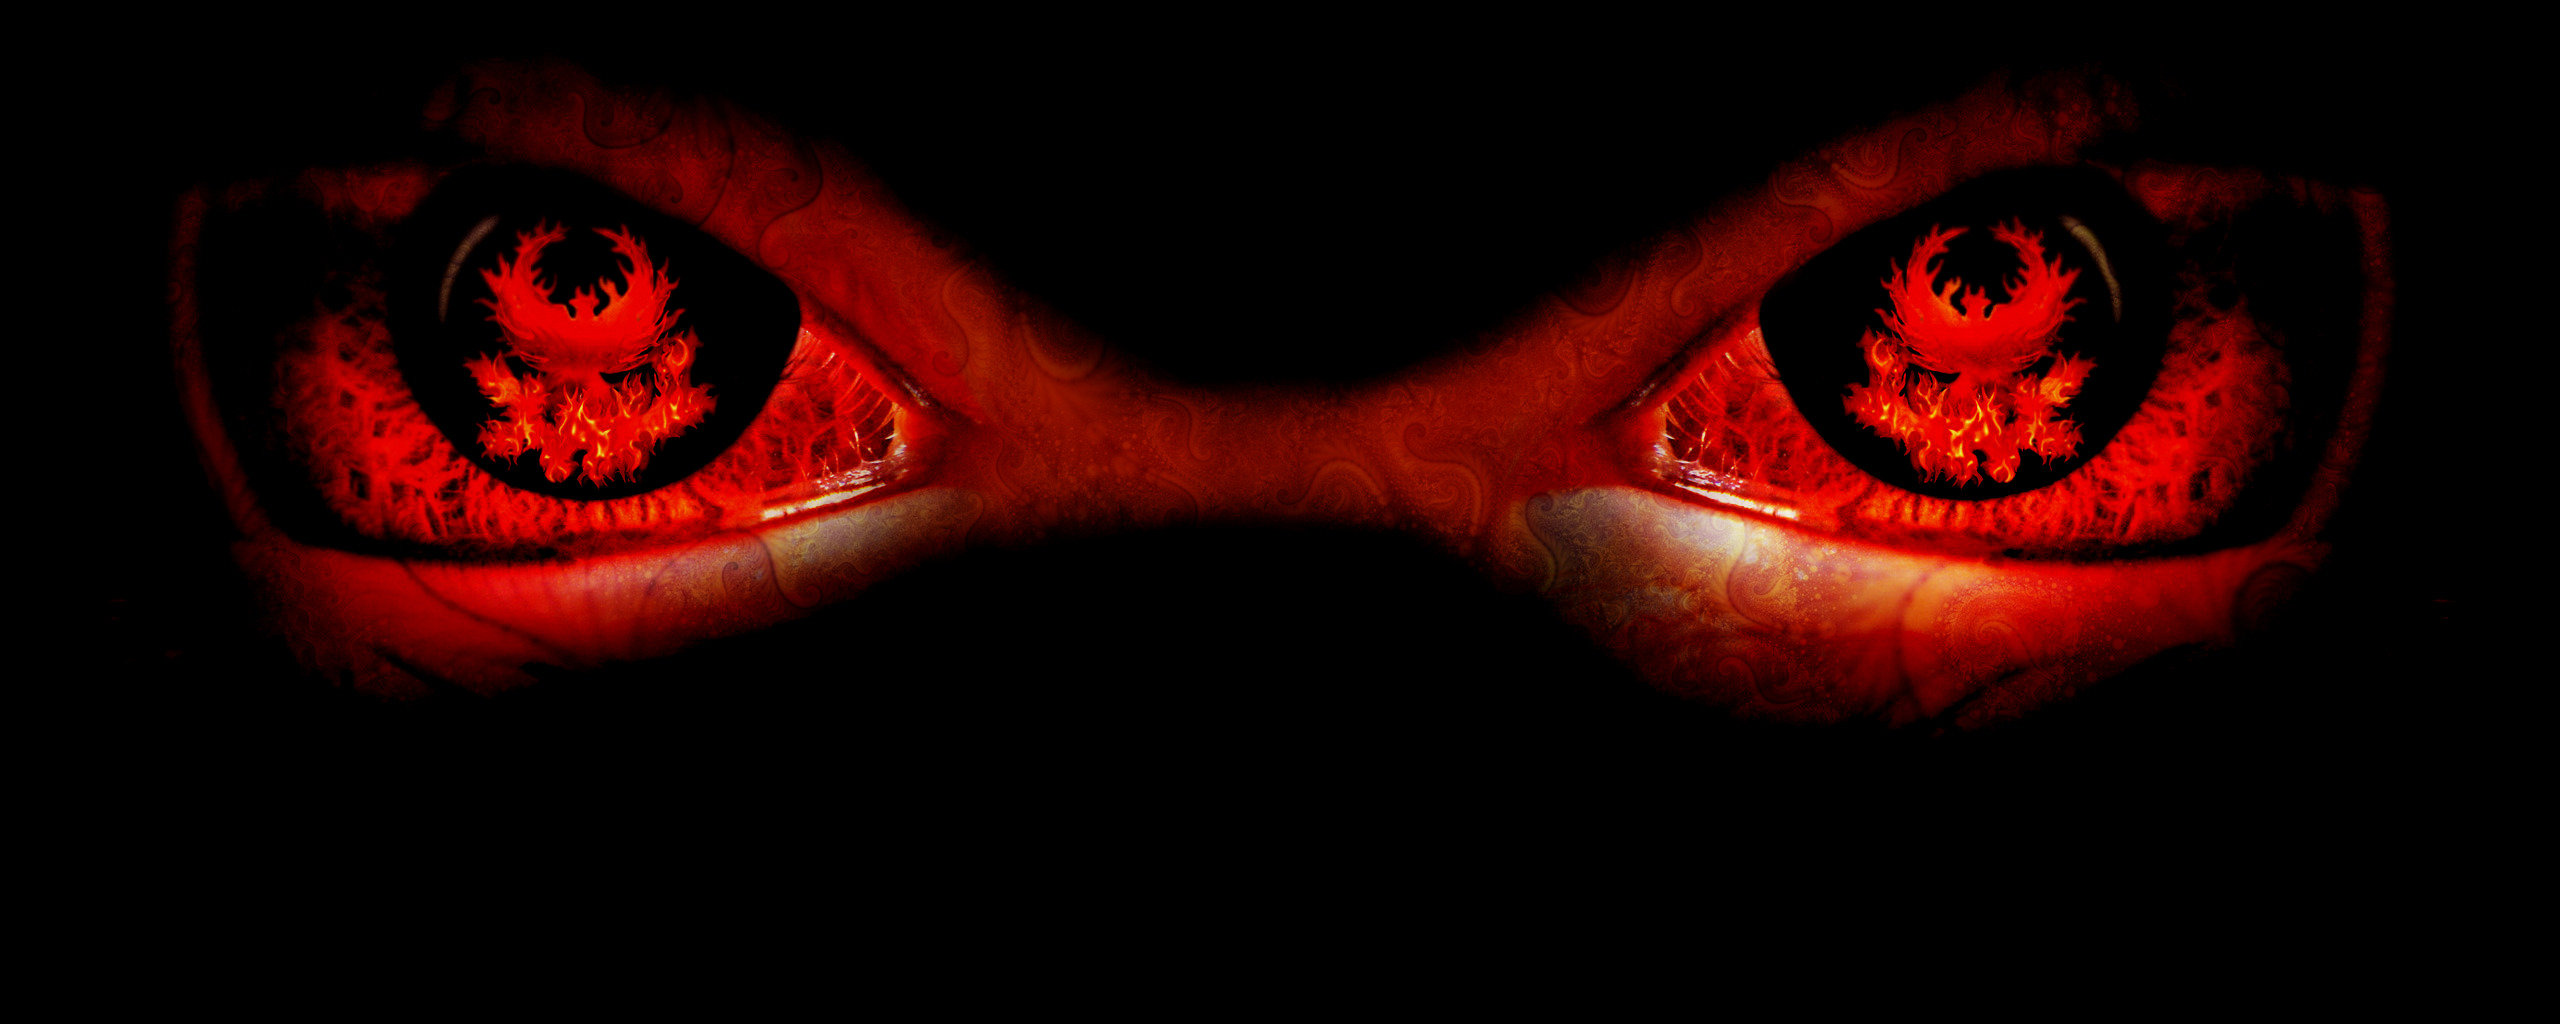 Red Evil Eye Wallpapers - Wallpaper Cave